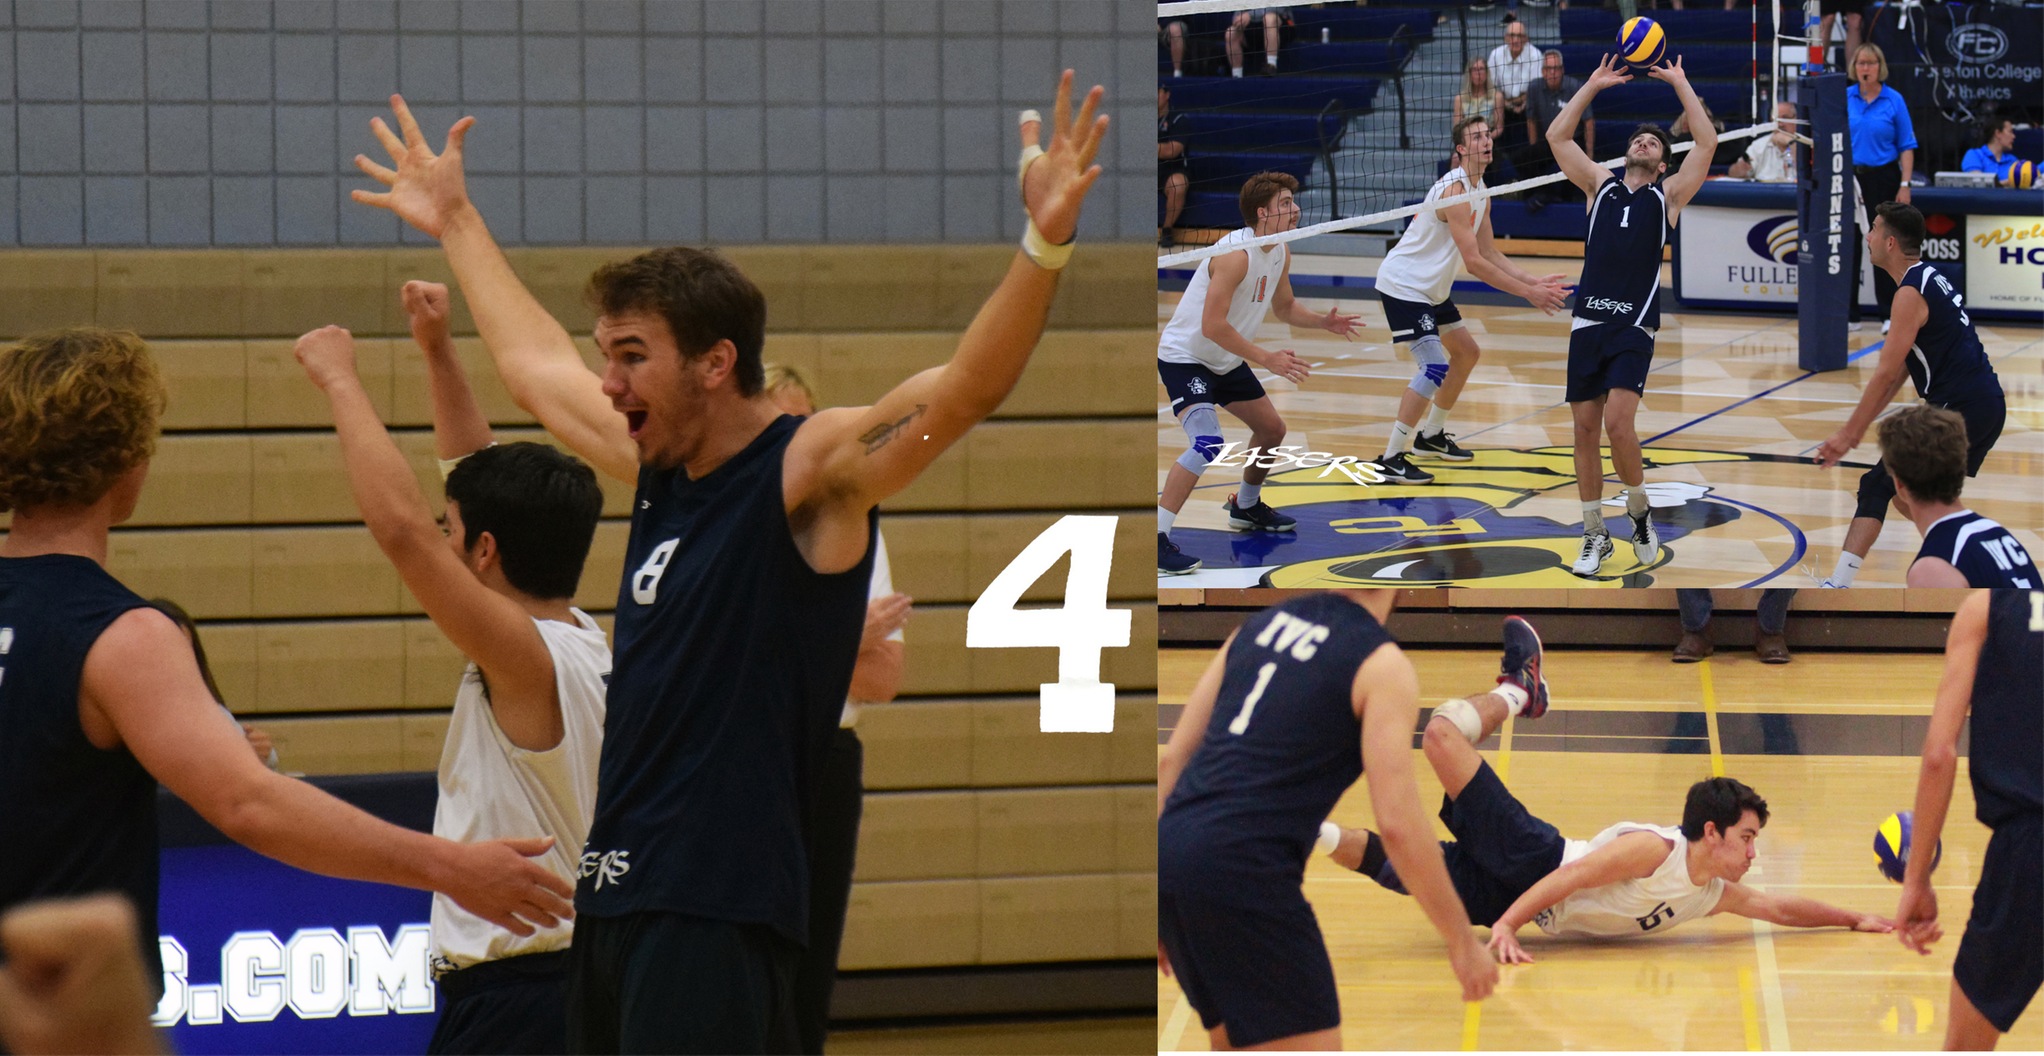 No. 4 Story of the Year - Men's volleyball team gets to state